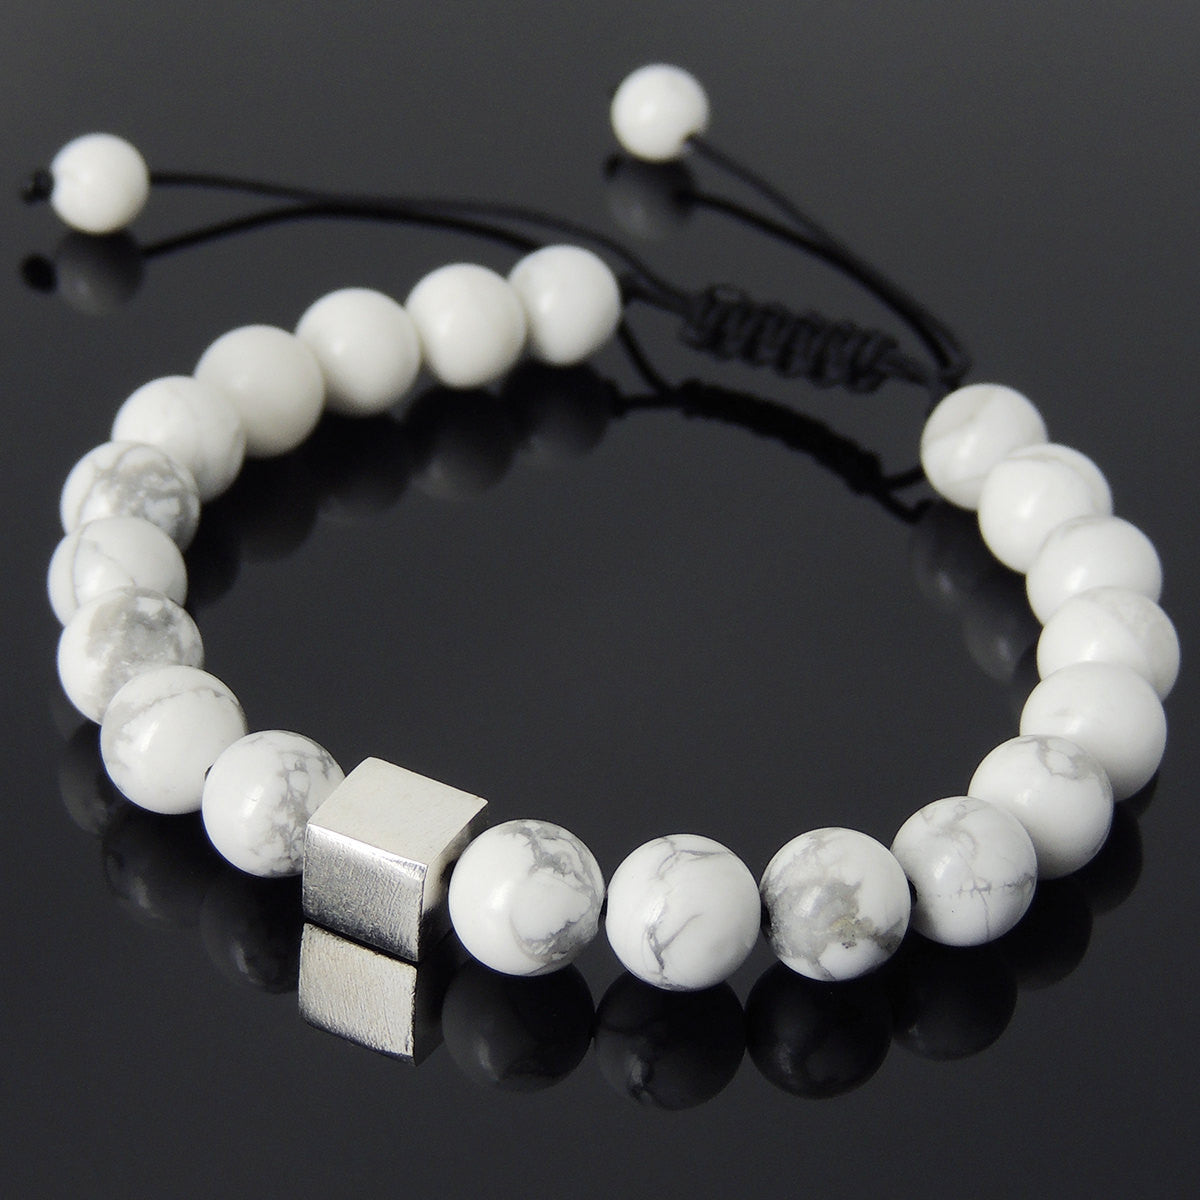 White Howlite Adjustable Braided Gemstone Bracelet with S925 Sterling Silver Cube Bead - Handmade by Gem & Silver BR807